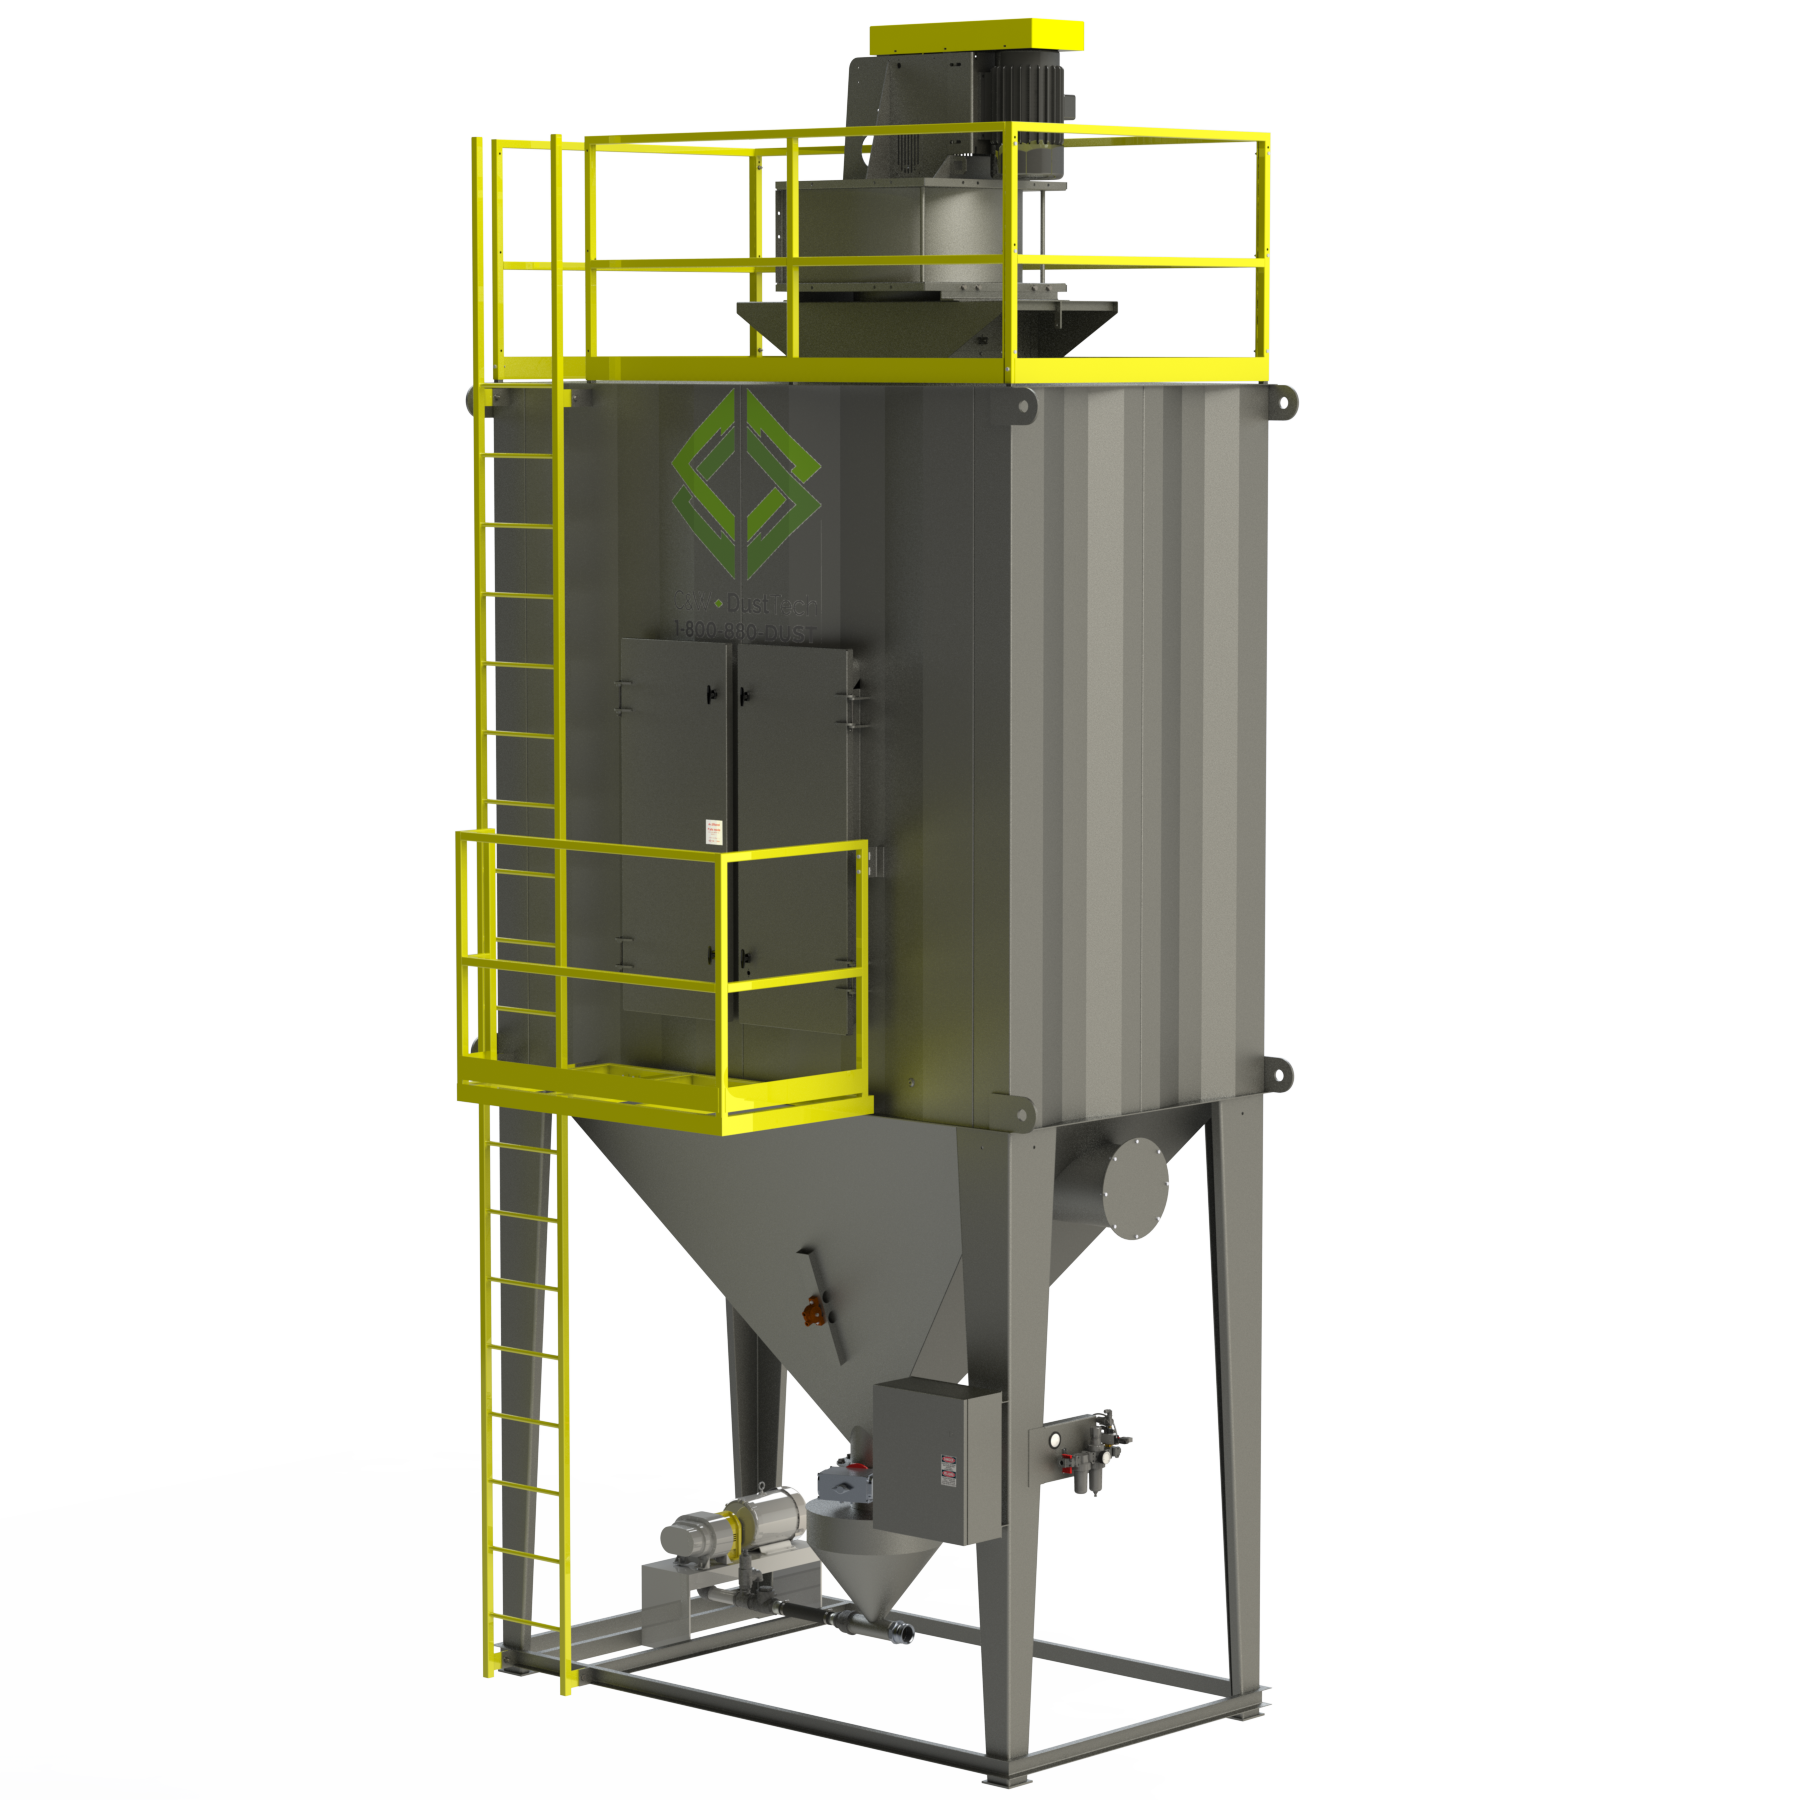 Central Dust Collector in operation, efficiently capturing and managing dust.